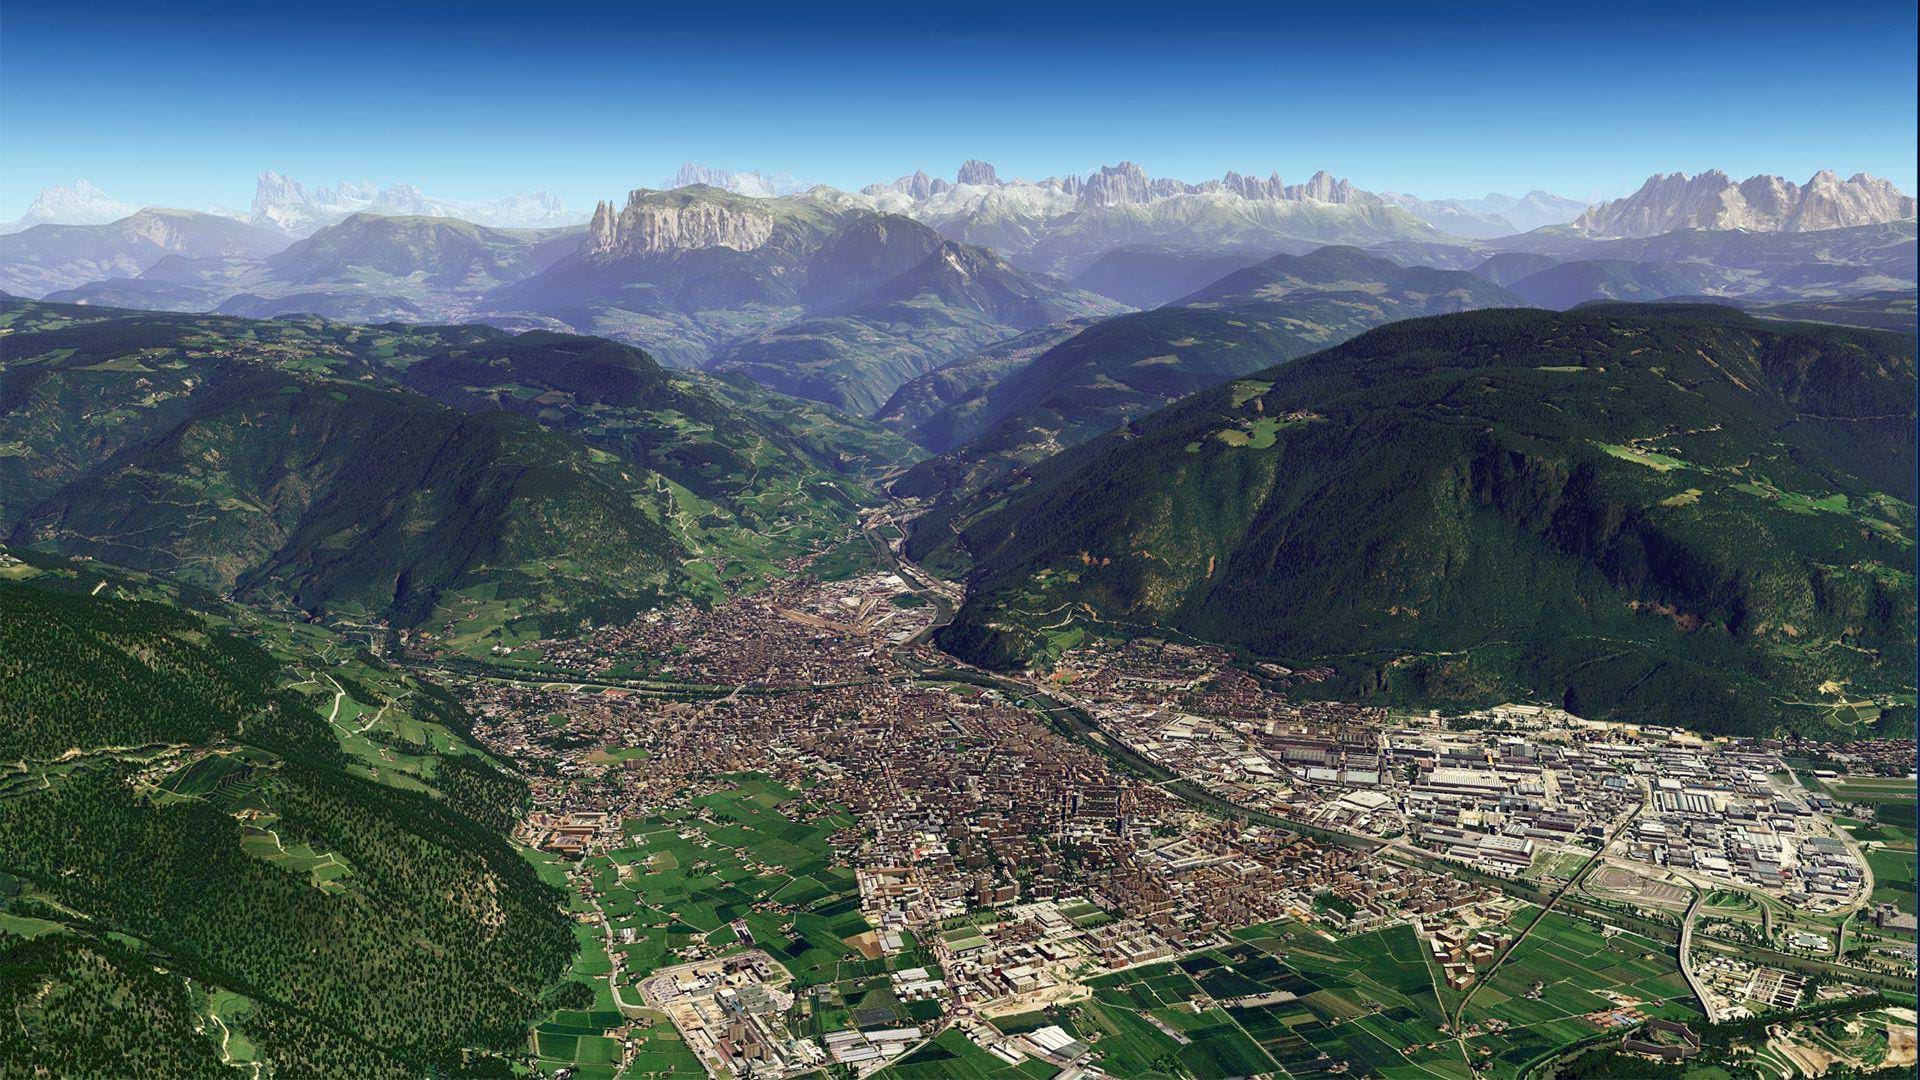 Coming to X-Plane: the Dolomites